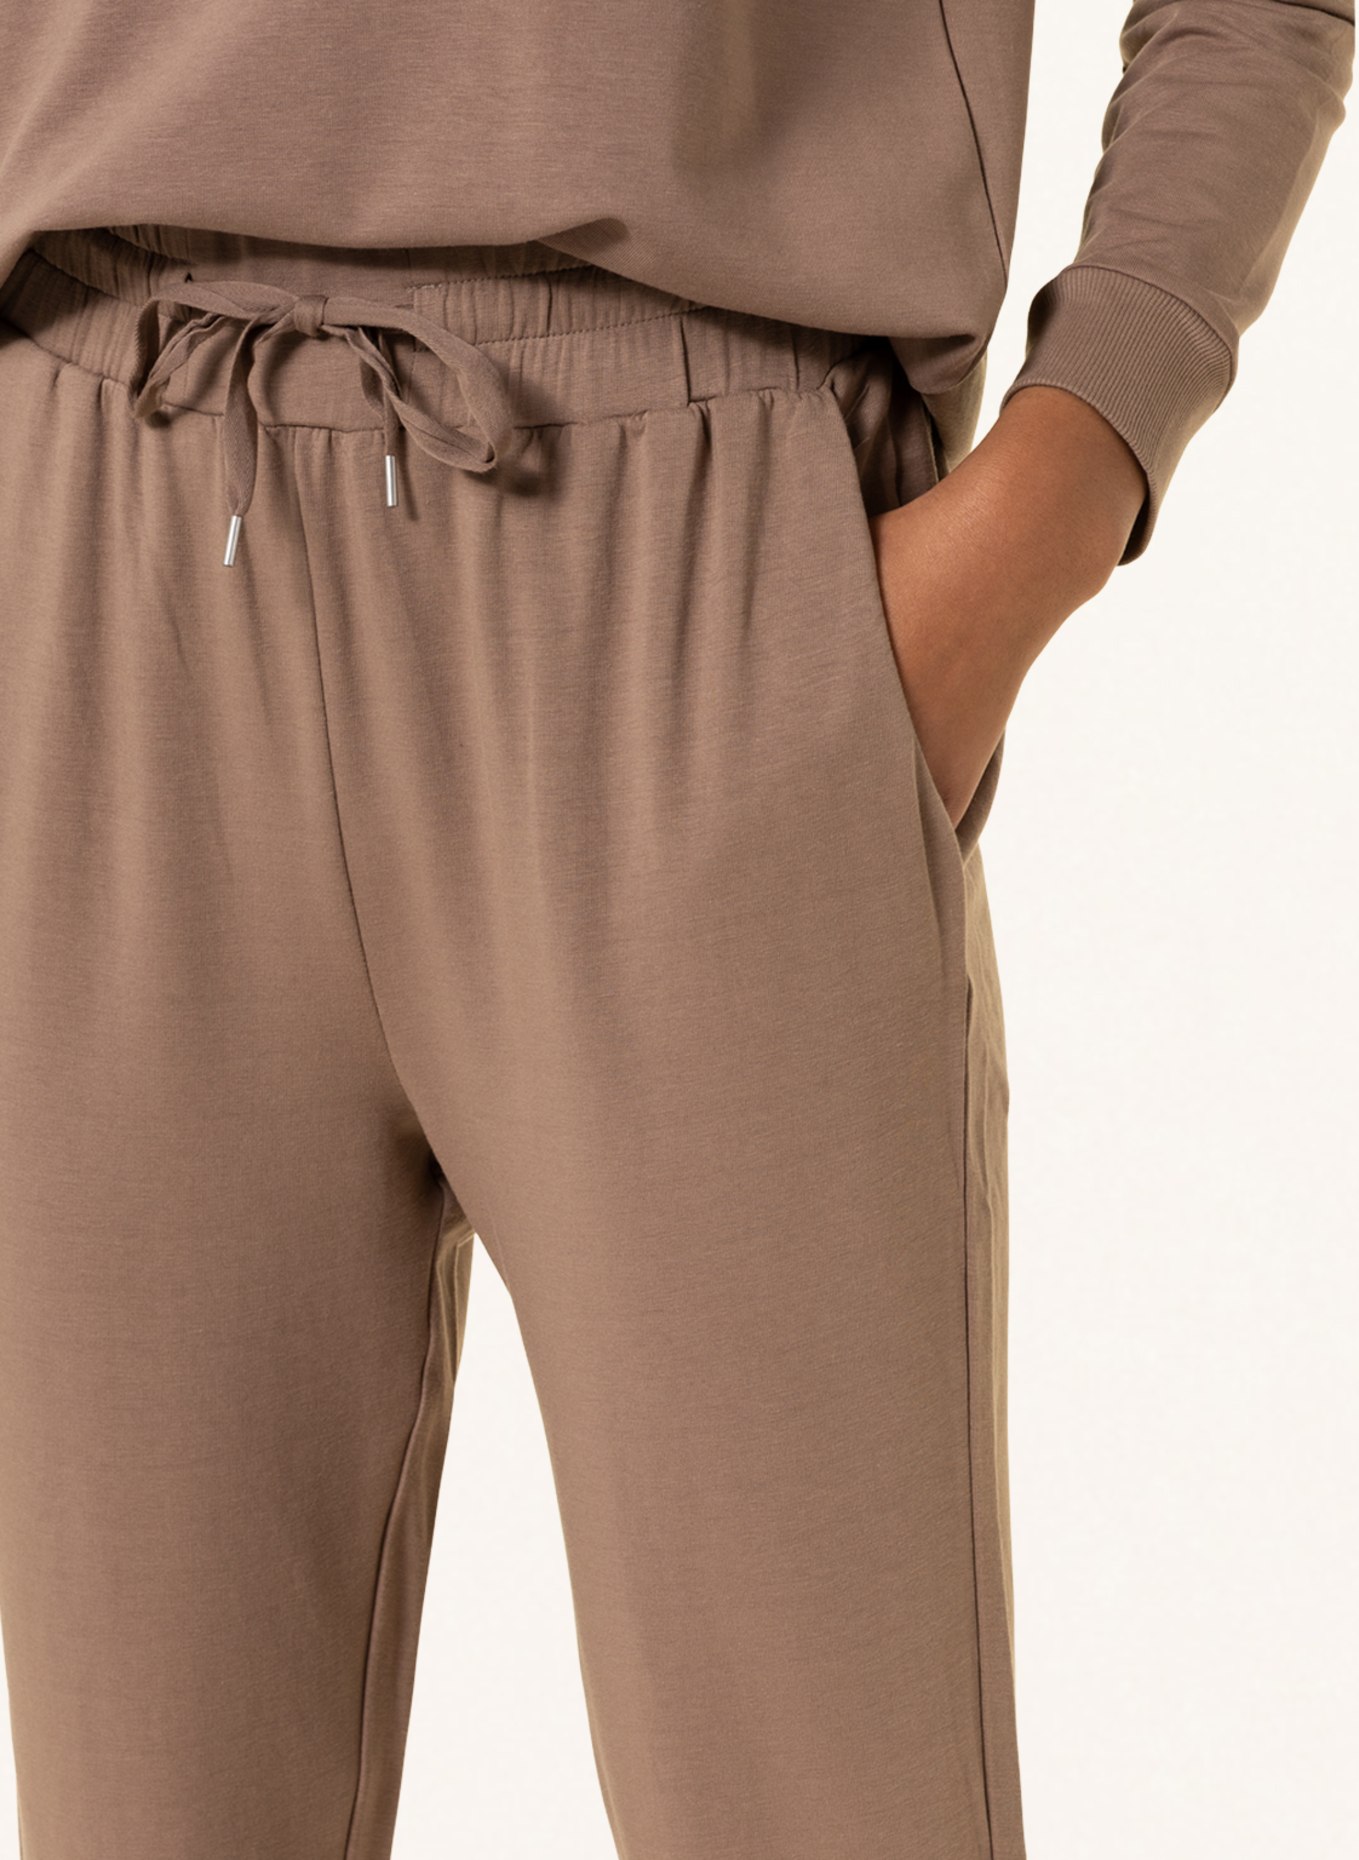 SCHIESSER Lounge pants MIX+RELAX, Color: BROWN (Image 5)